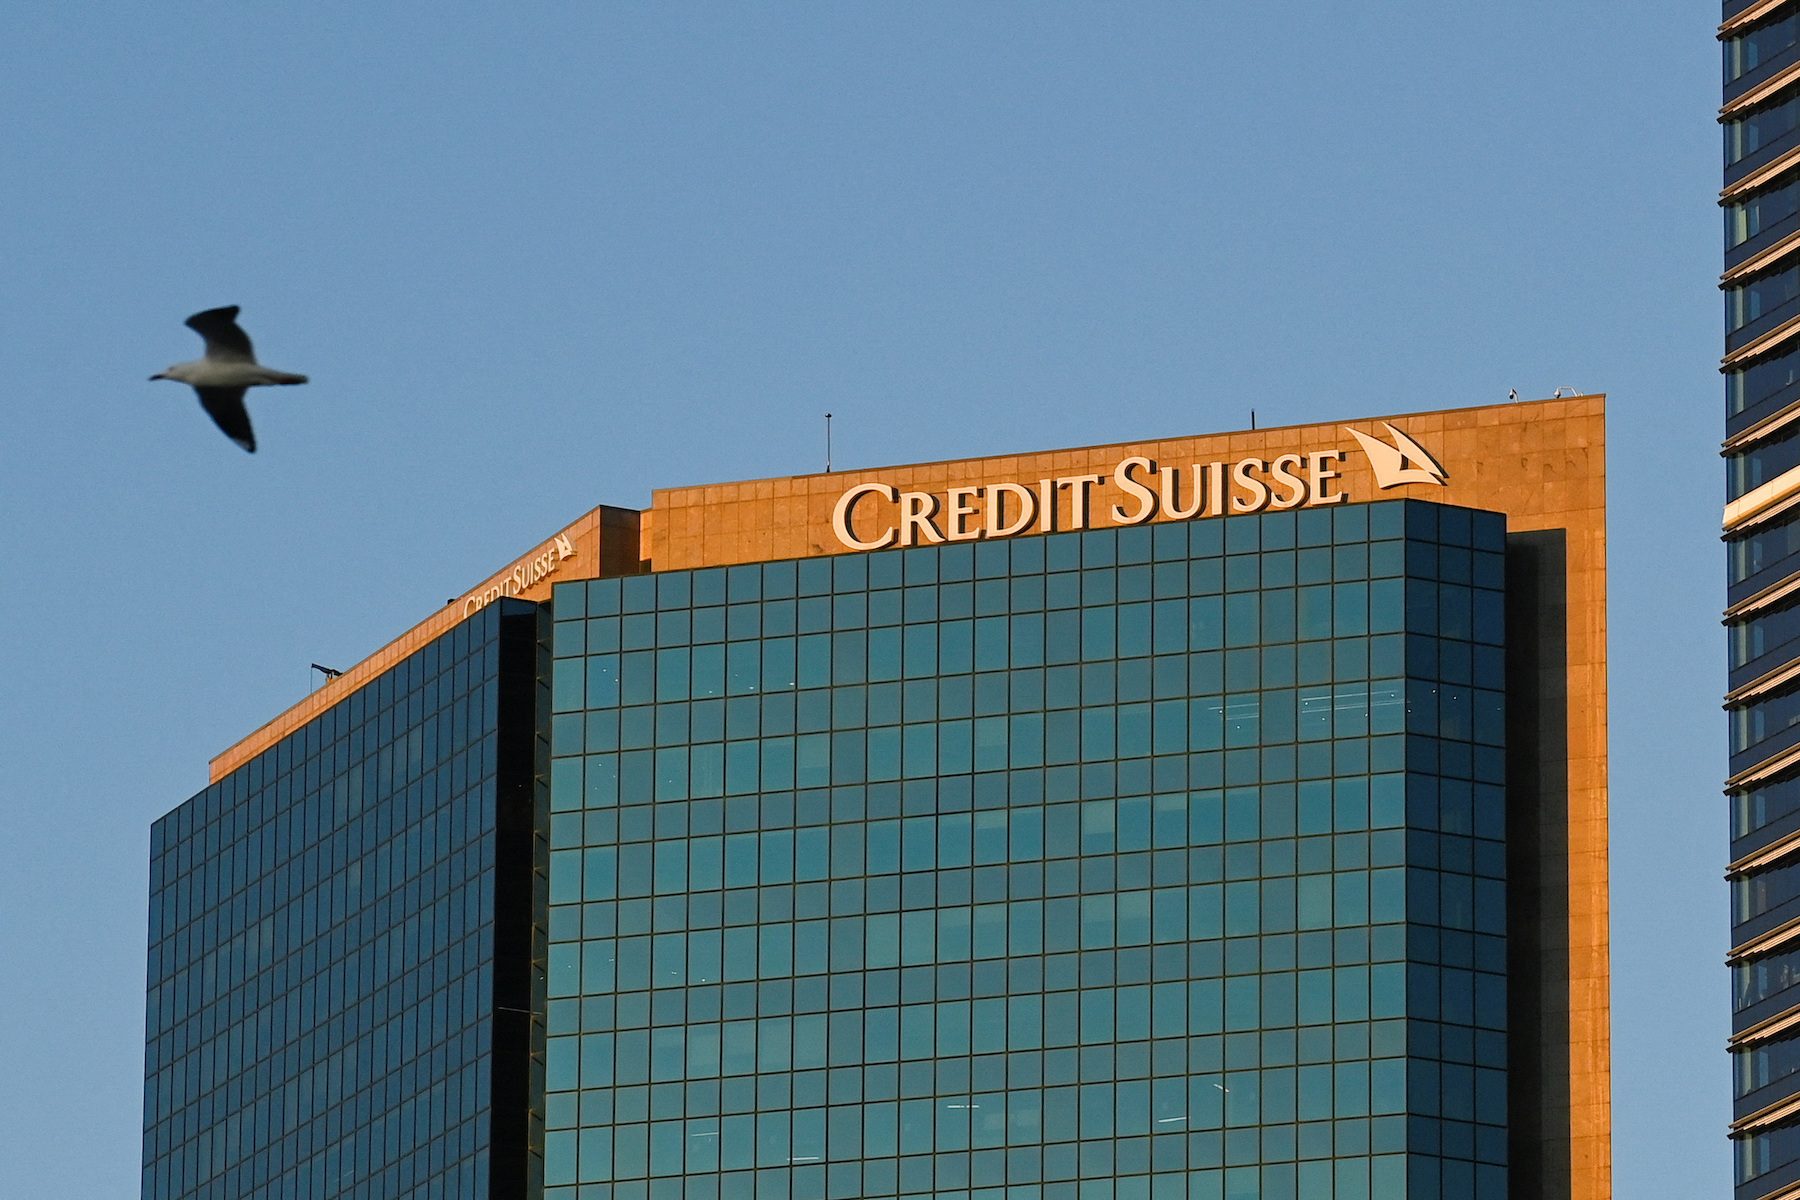 Credit Suisse faces crucial weekend with its future in balance